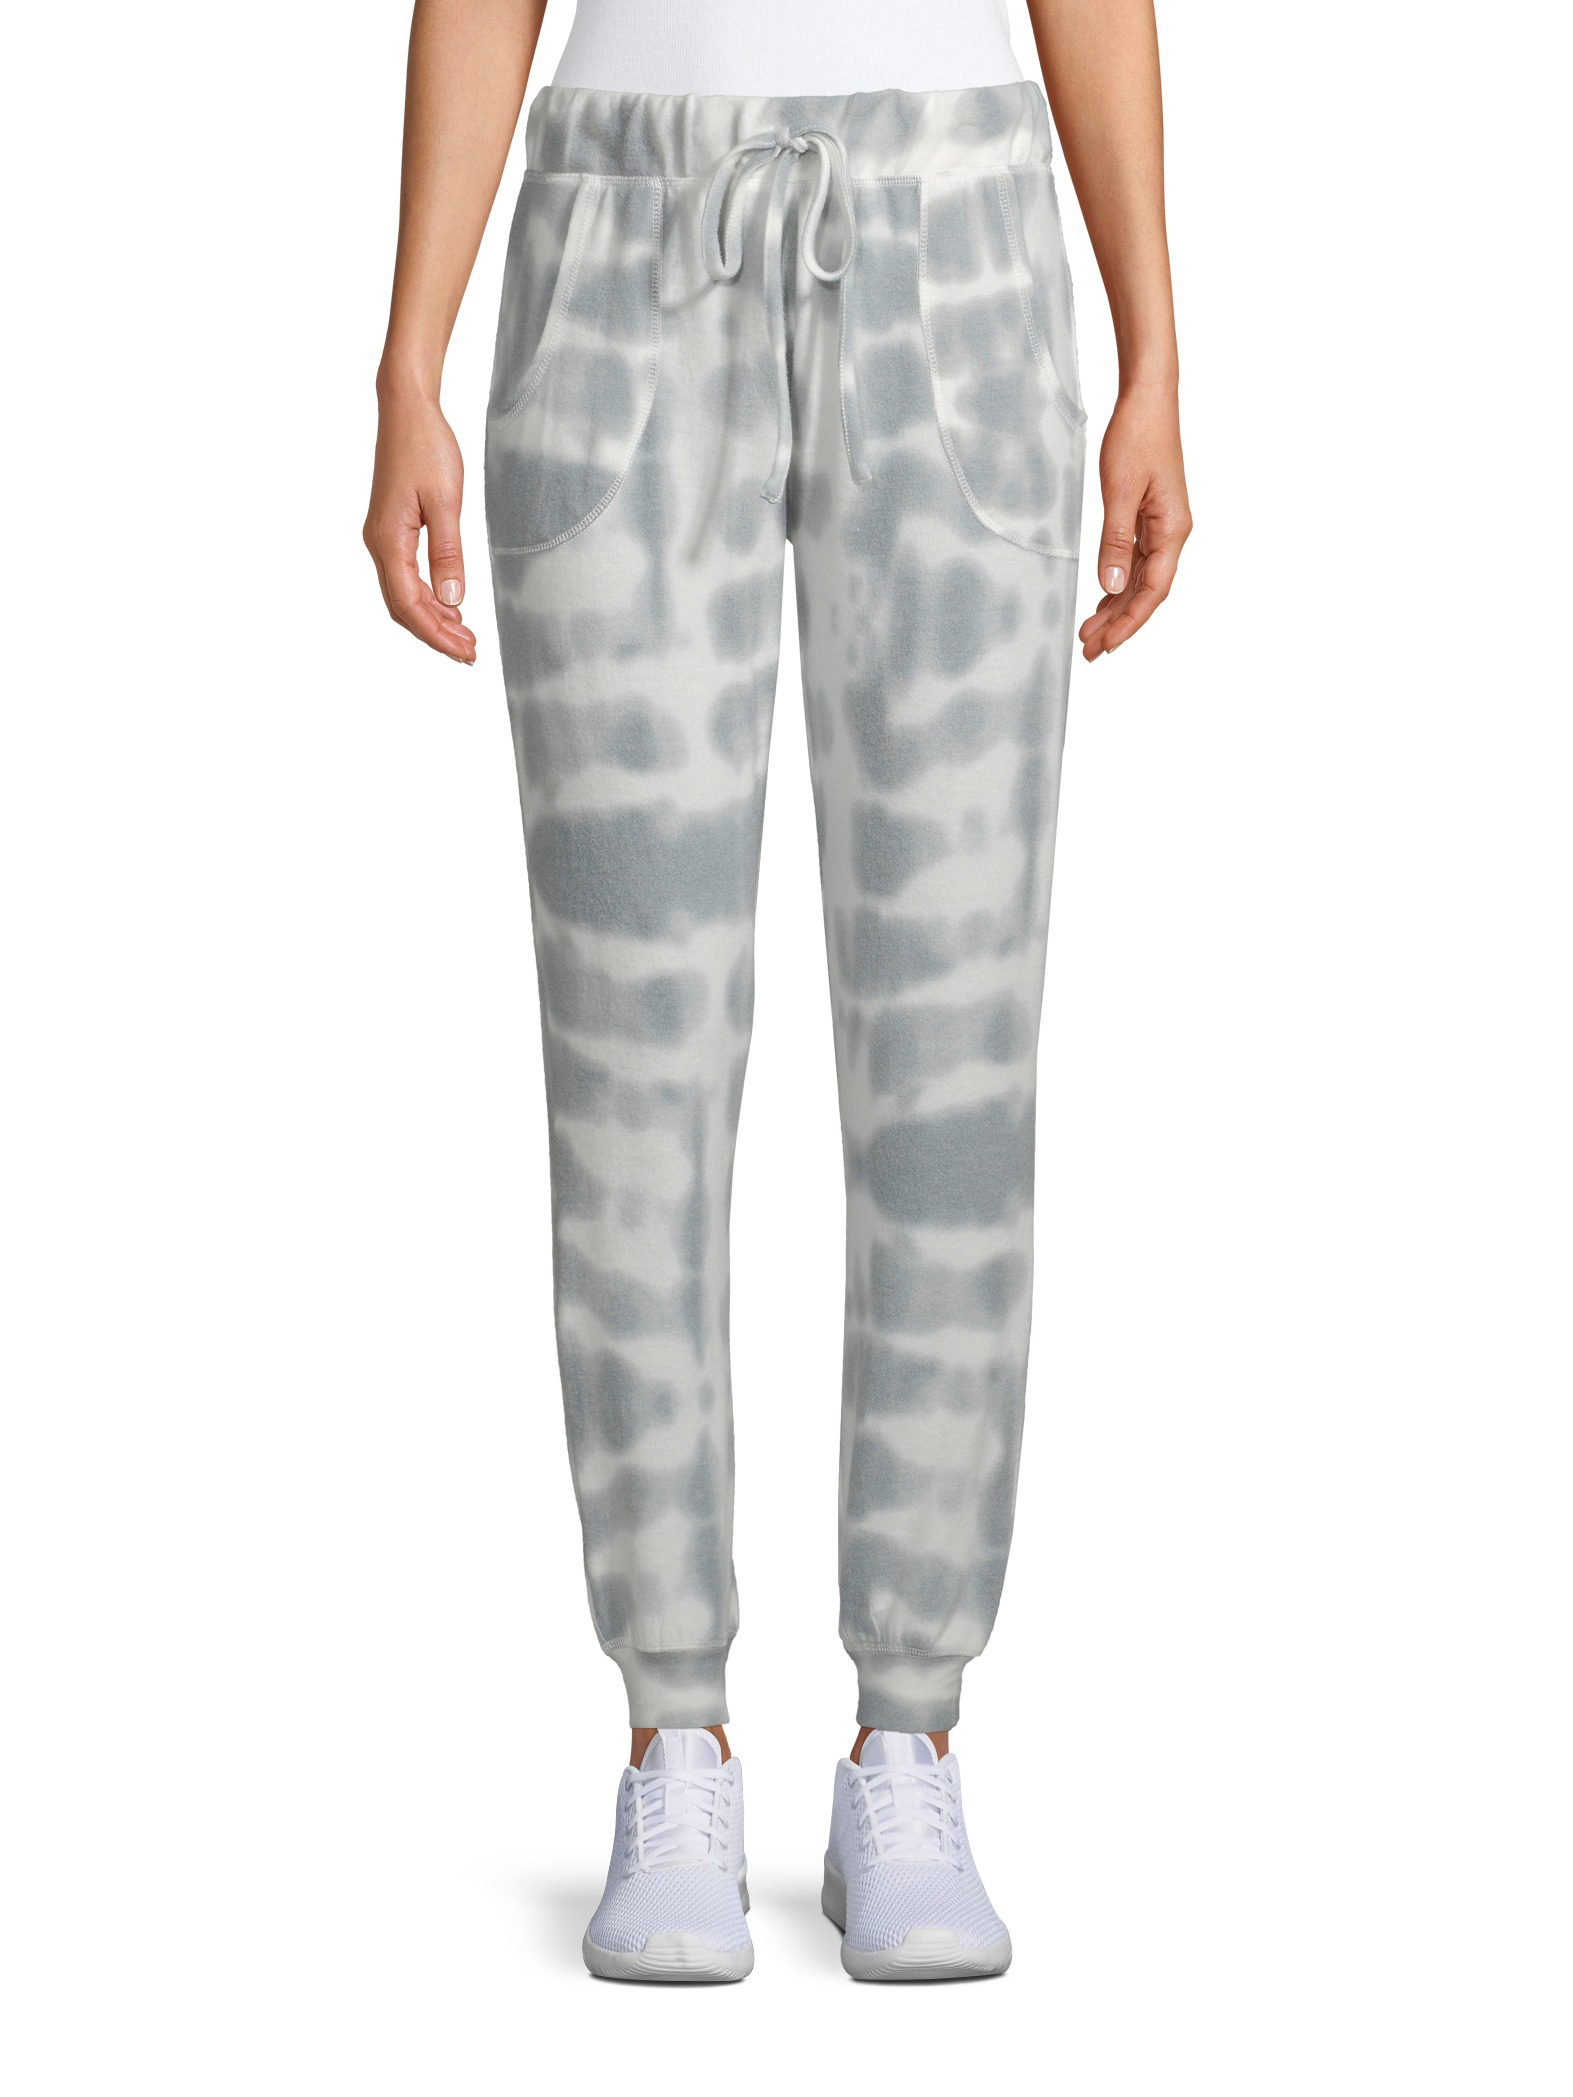 Como Blu Women's Athleisure Tie Dye Hacci Joggers with Pockets - image 1 of 6